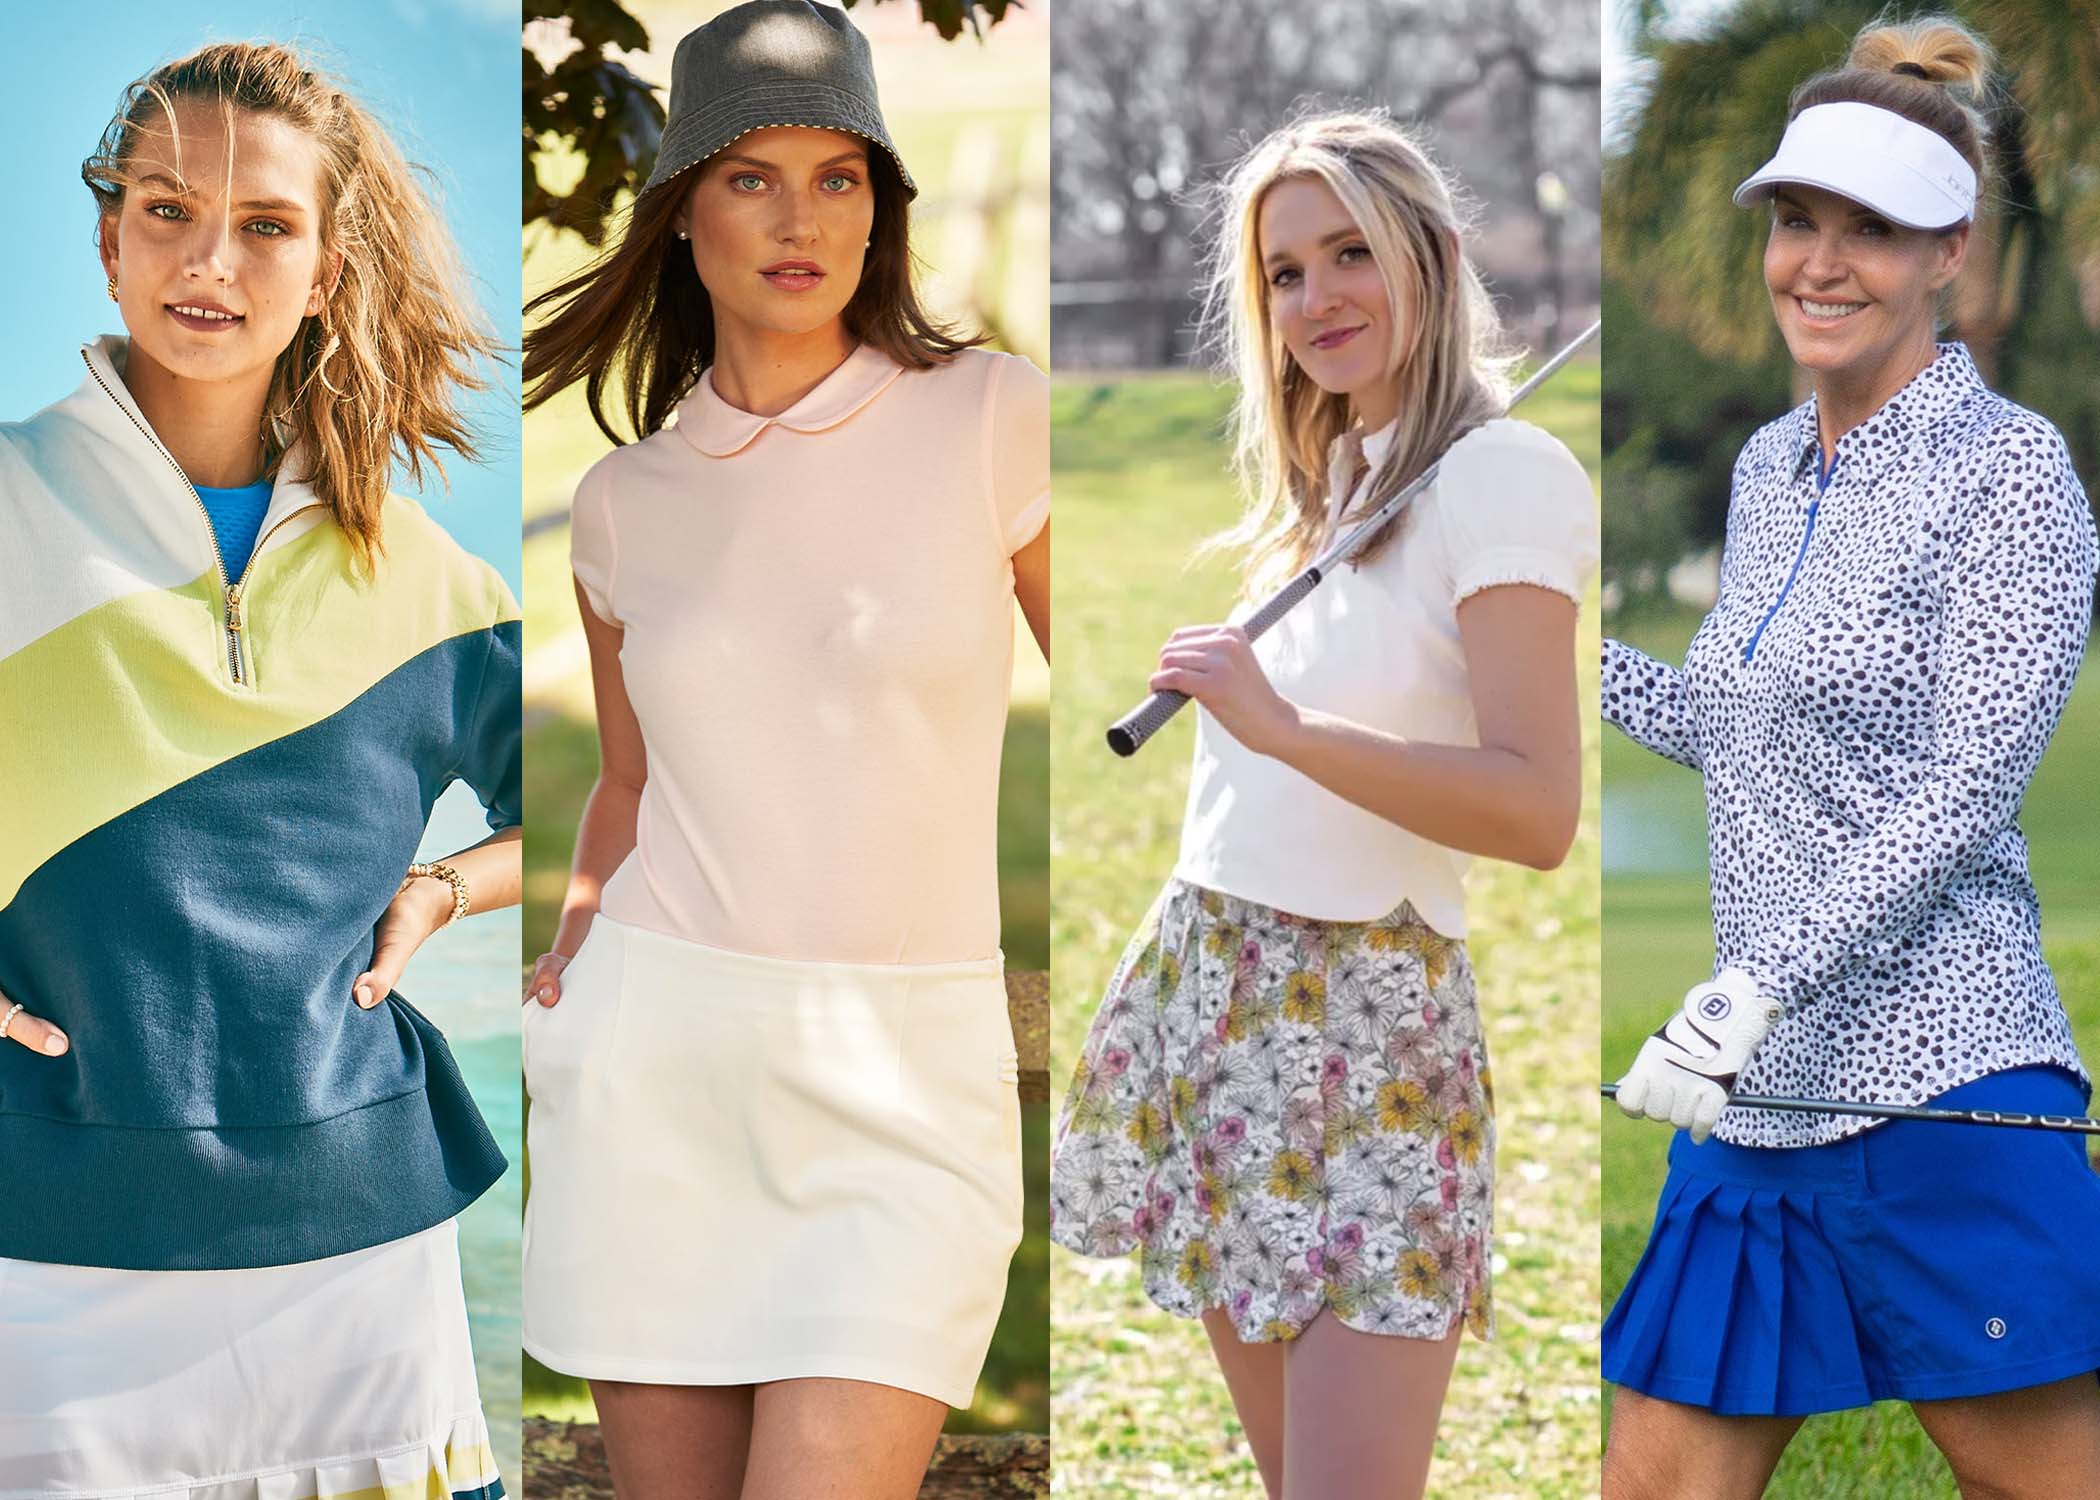 golf clothes for women - Google Search